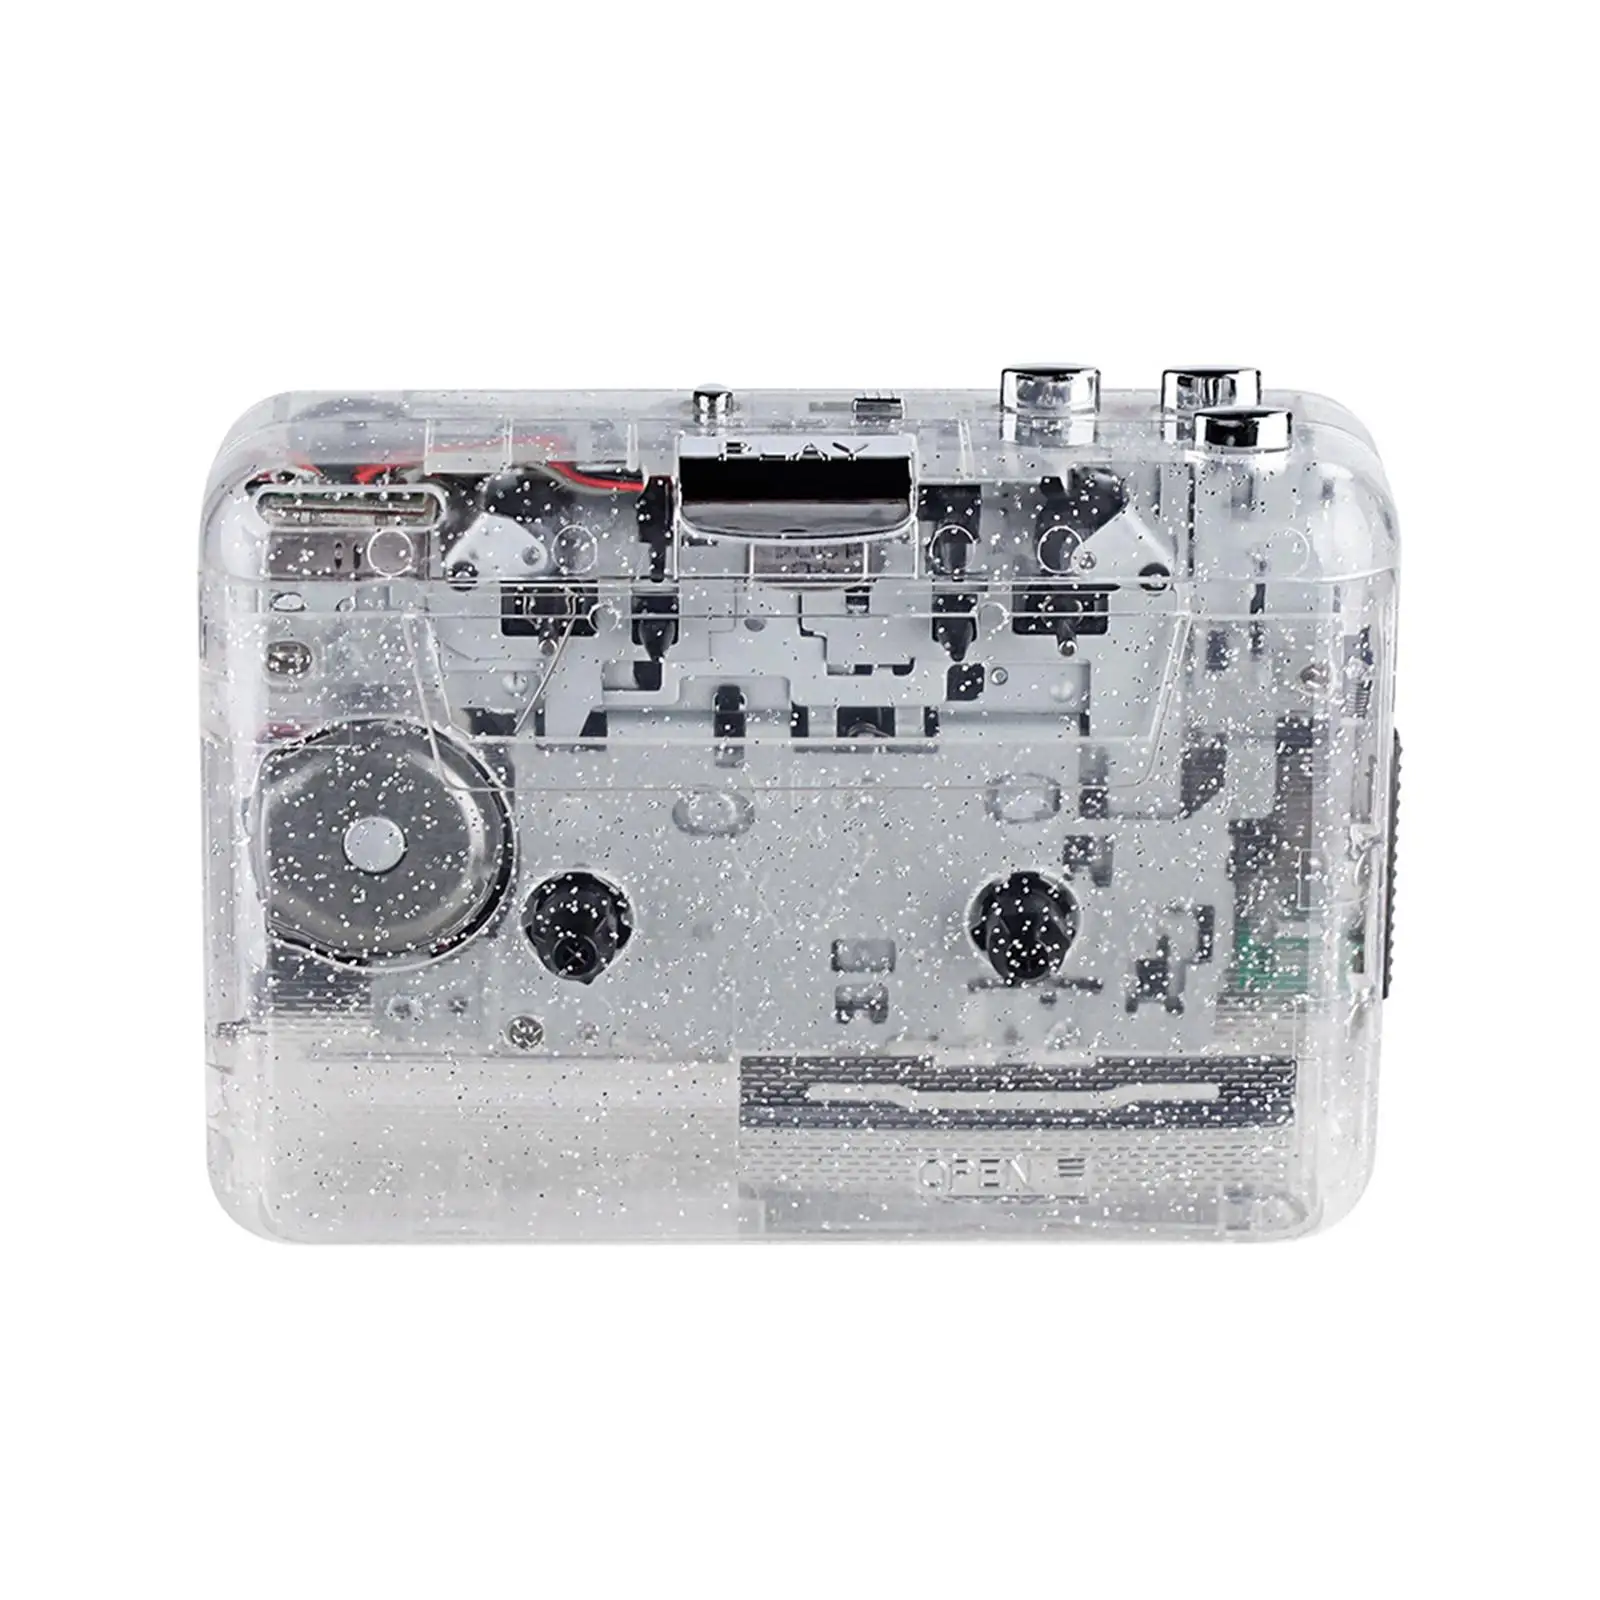 Personal Portable Radio Cassette Player Lightweight Design for Entertainment Travel Sports Portable Tape Player Compact Recorder